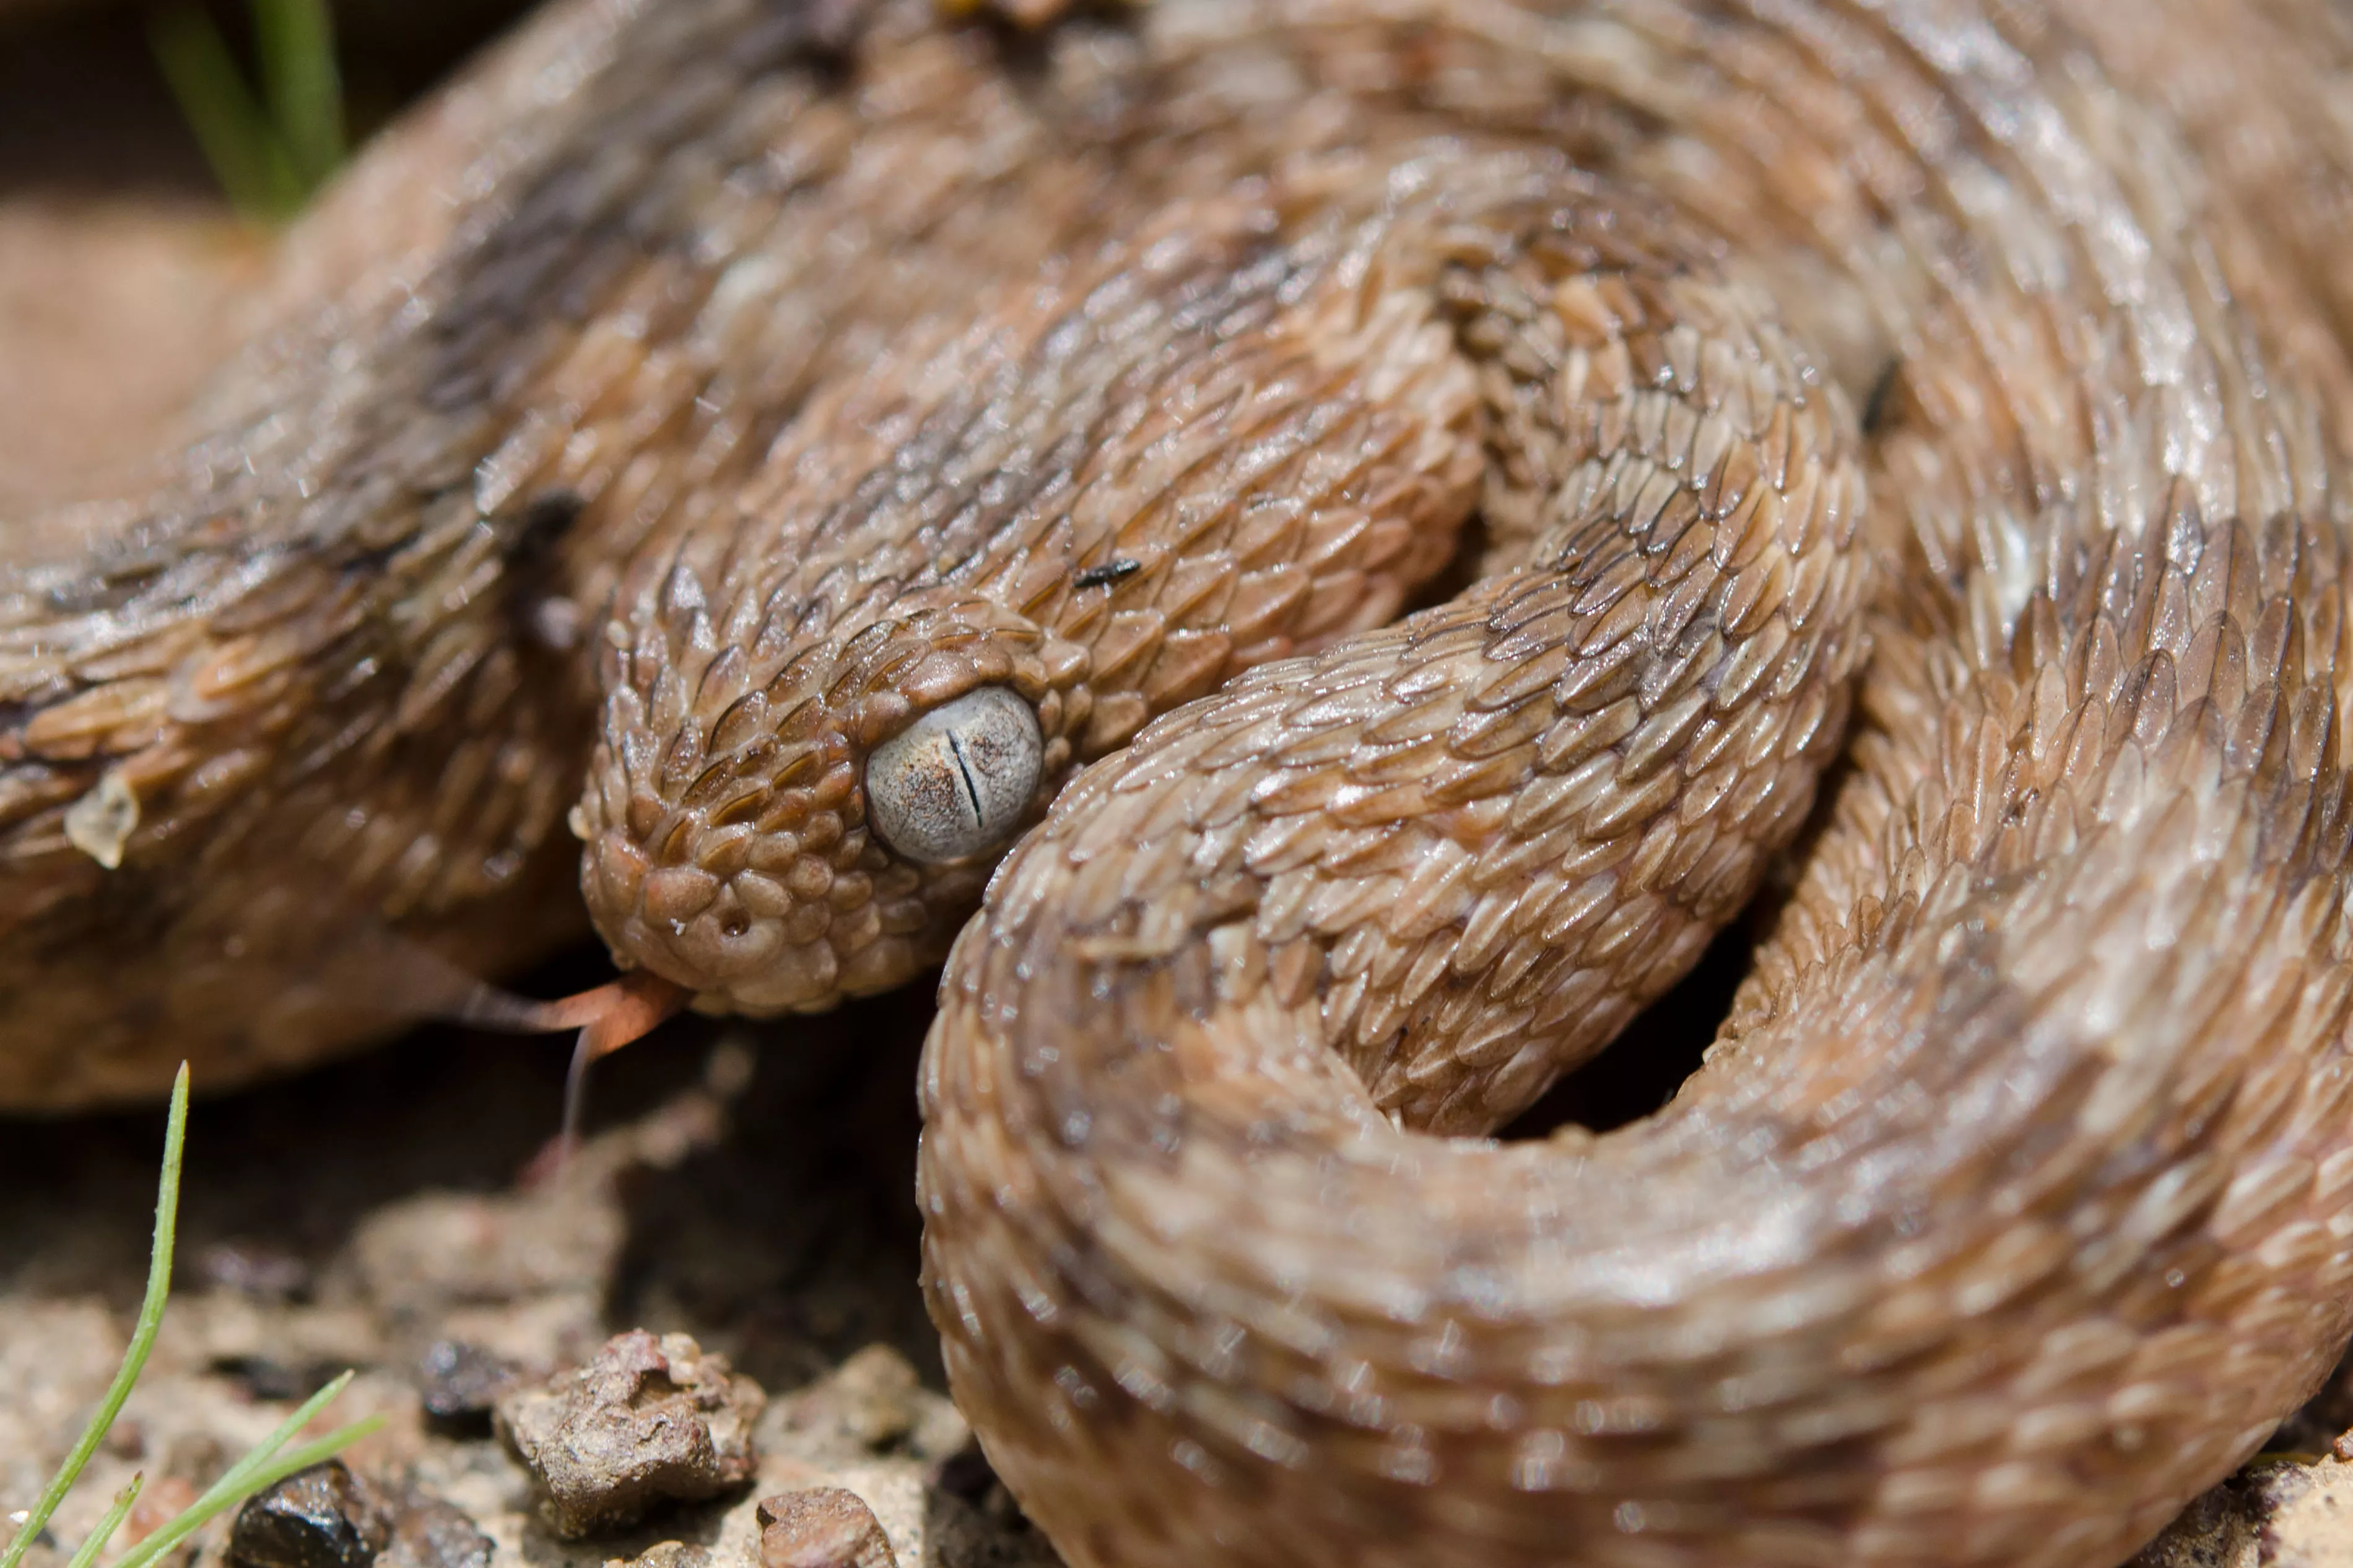 Echis ocellatus is a venomous viper species endemic to West Africa.